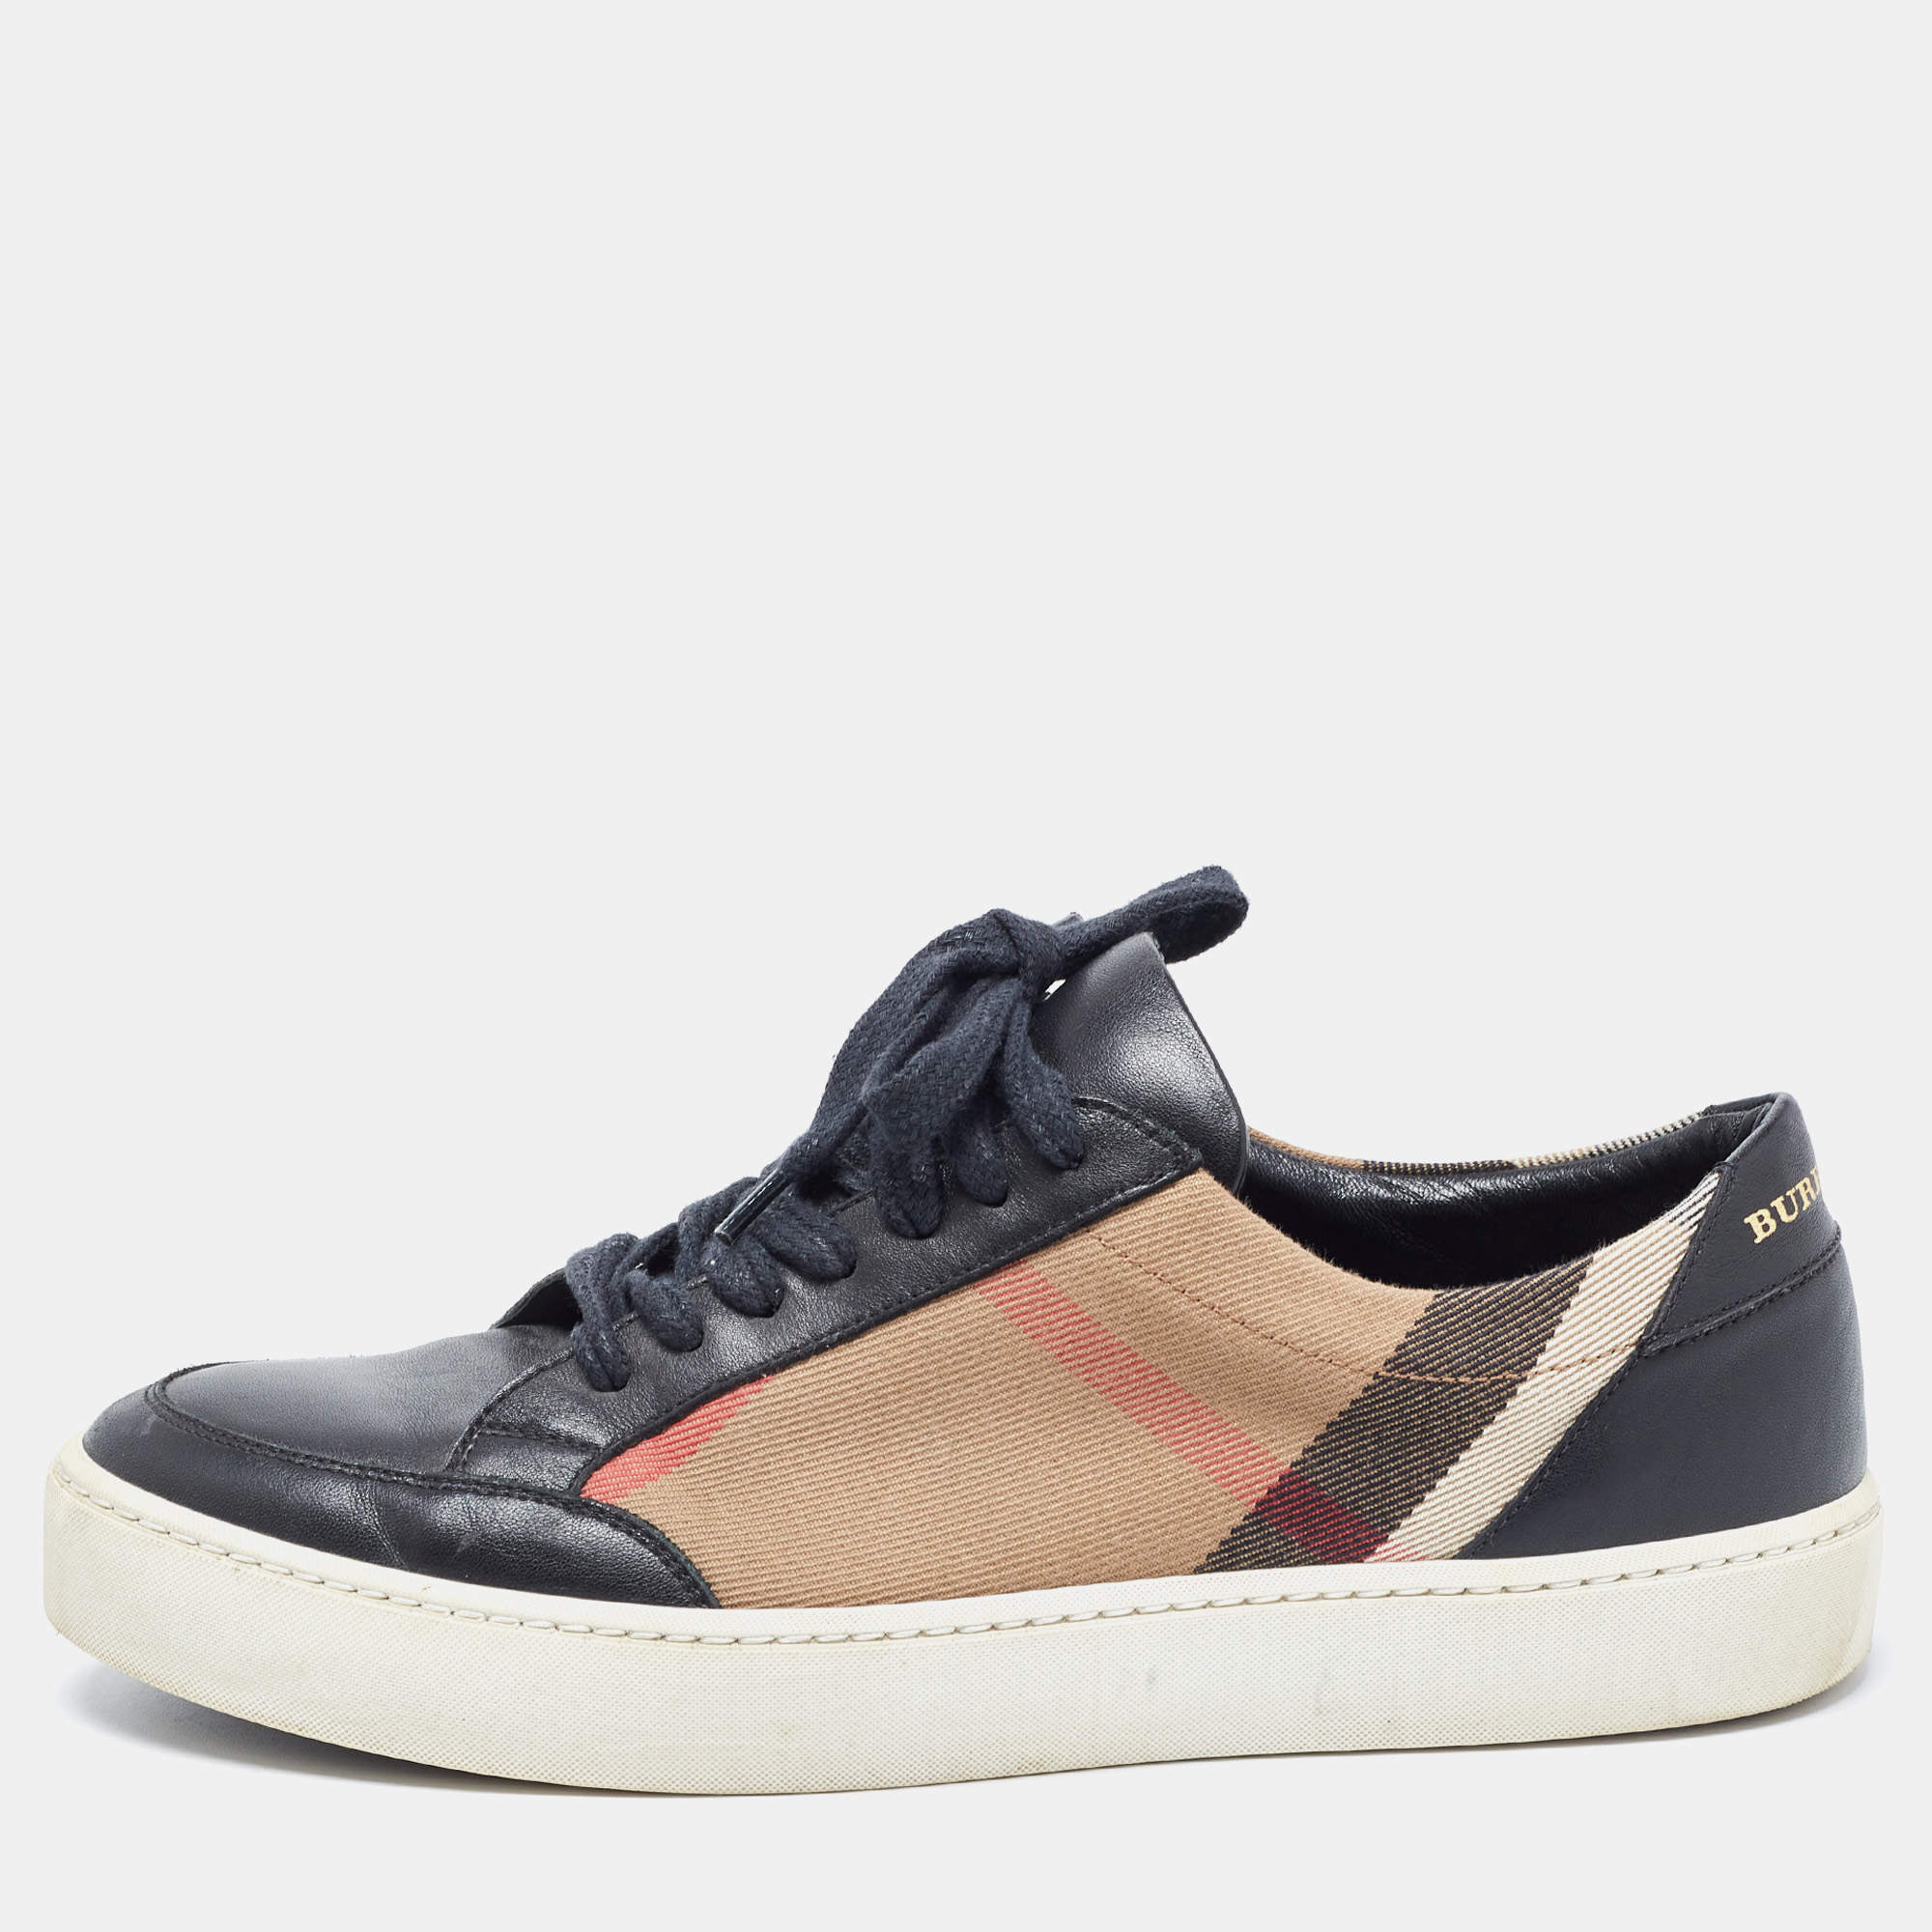 Burberry Black/Beige Canvas and Leather Low Top Sneakers Size 39.5